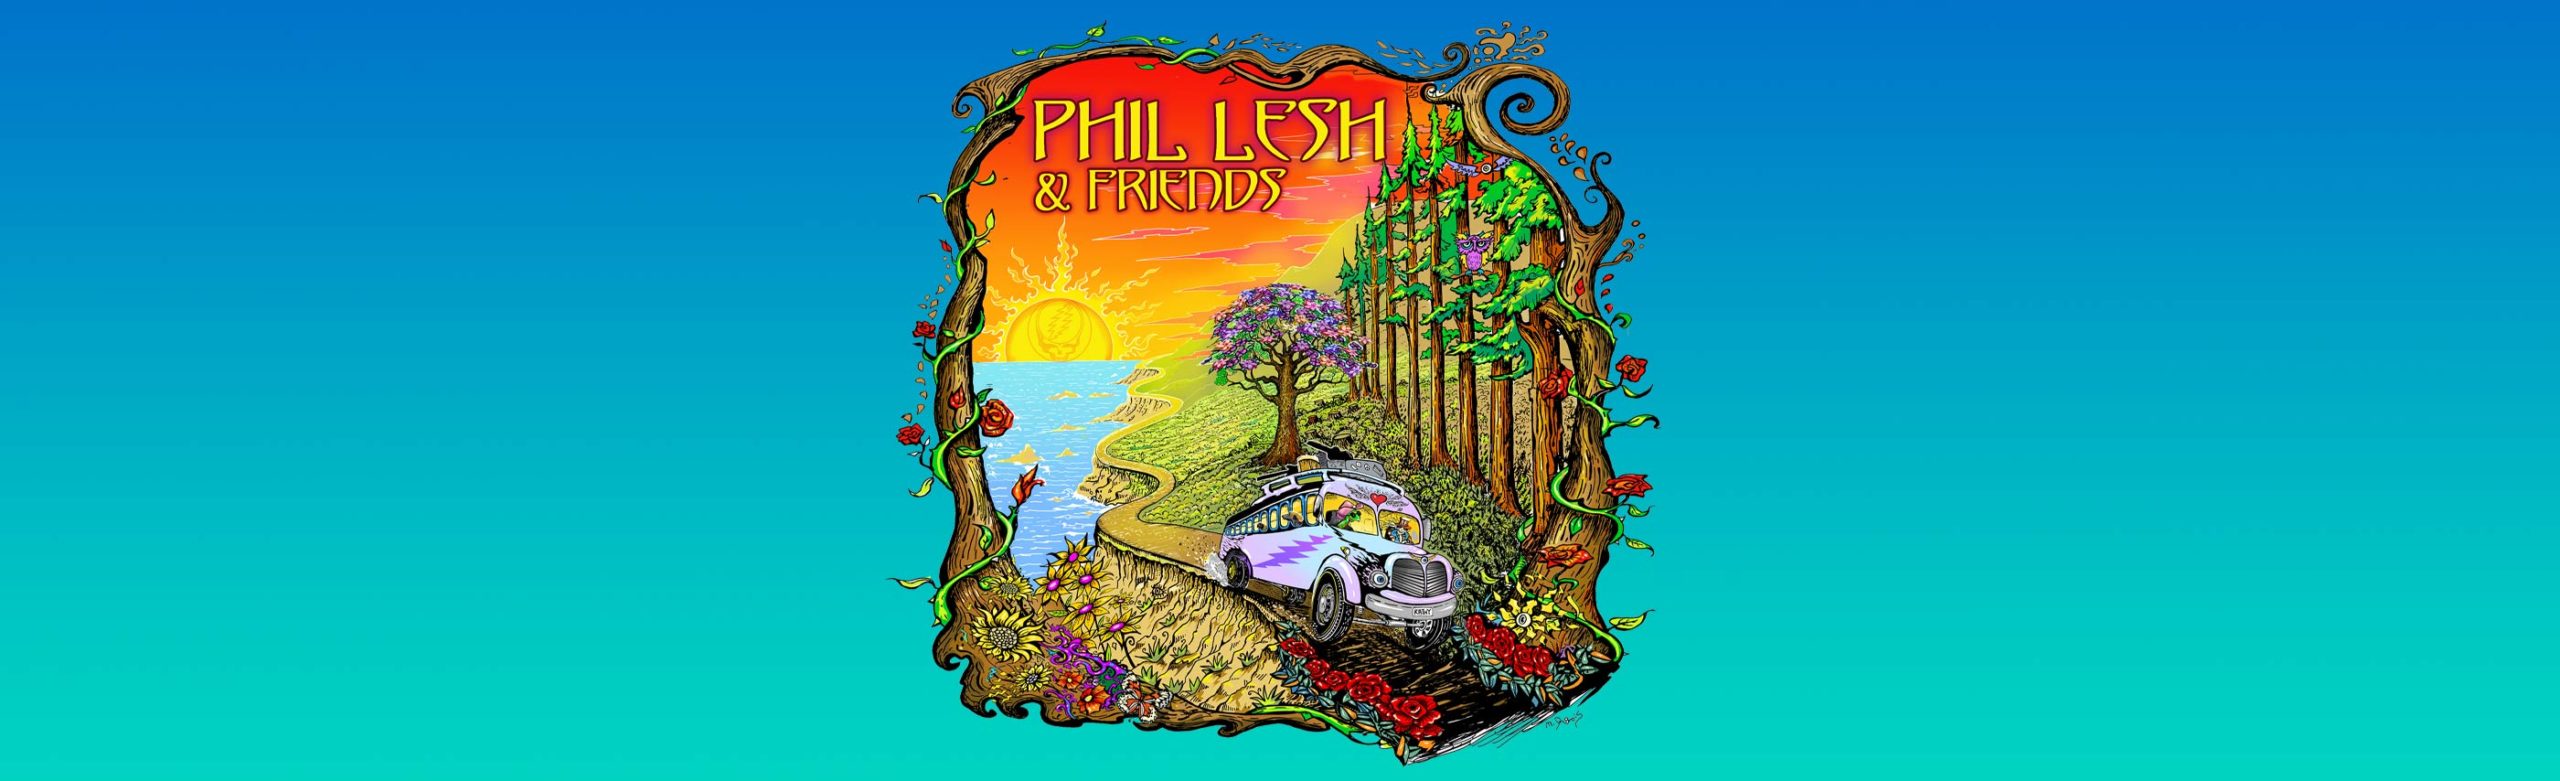 Phil Lesh and Friends Tickets + Limited Edition ‘Groove to the Music’ T-Shirt Giveaway 2022 Image